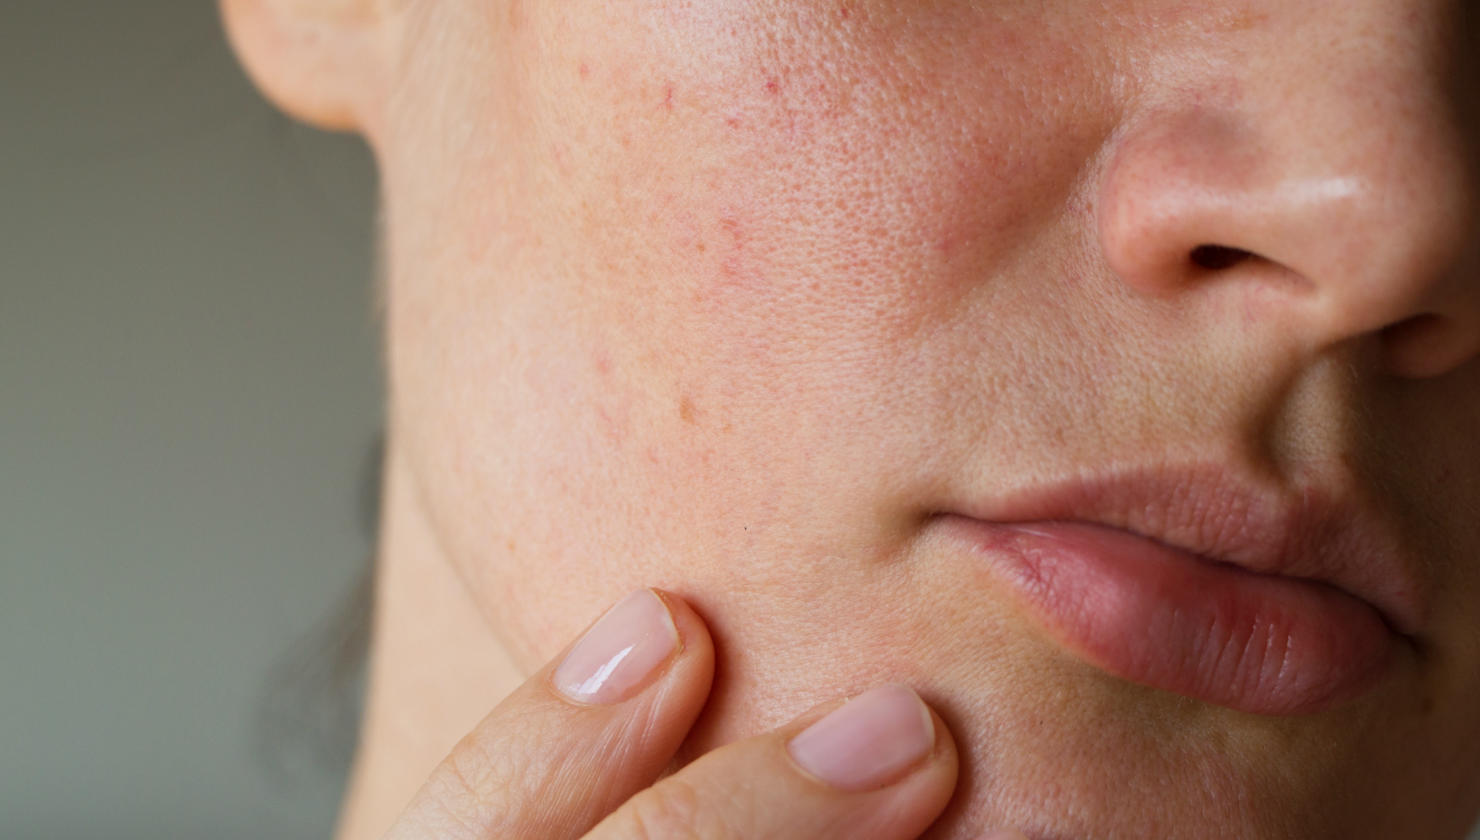 large pores on woman